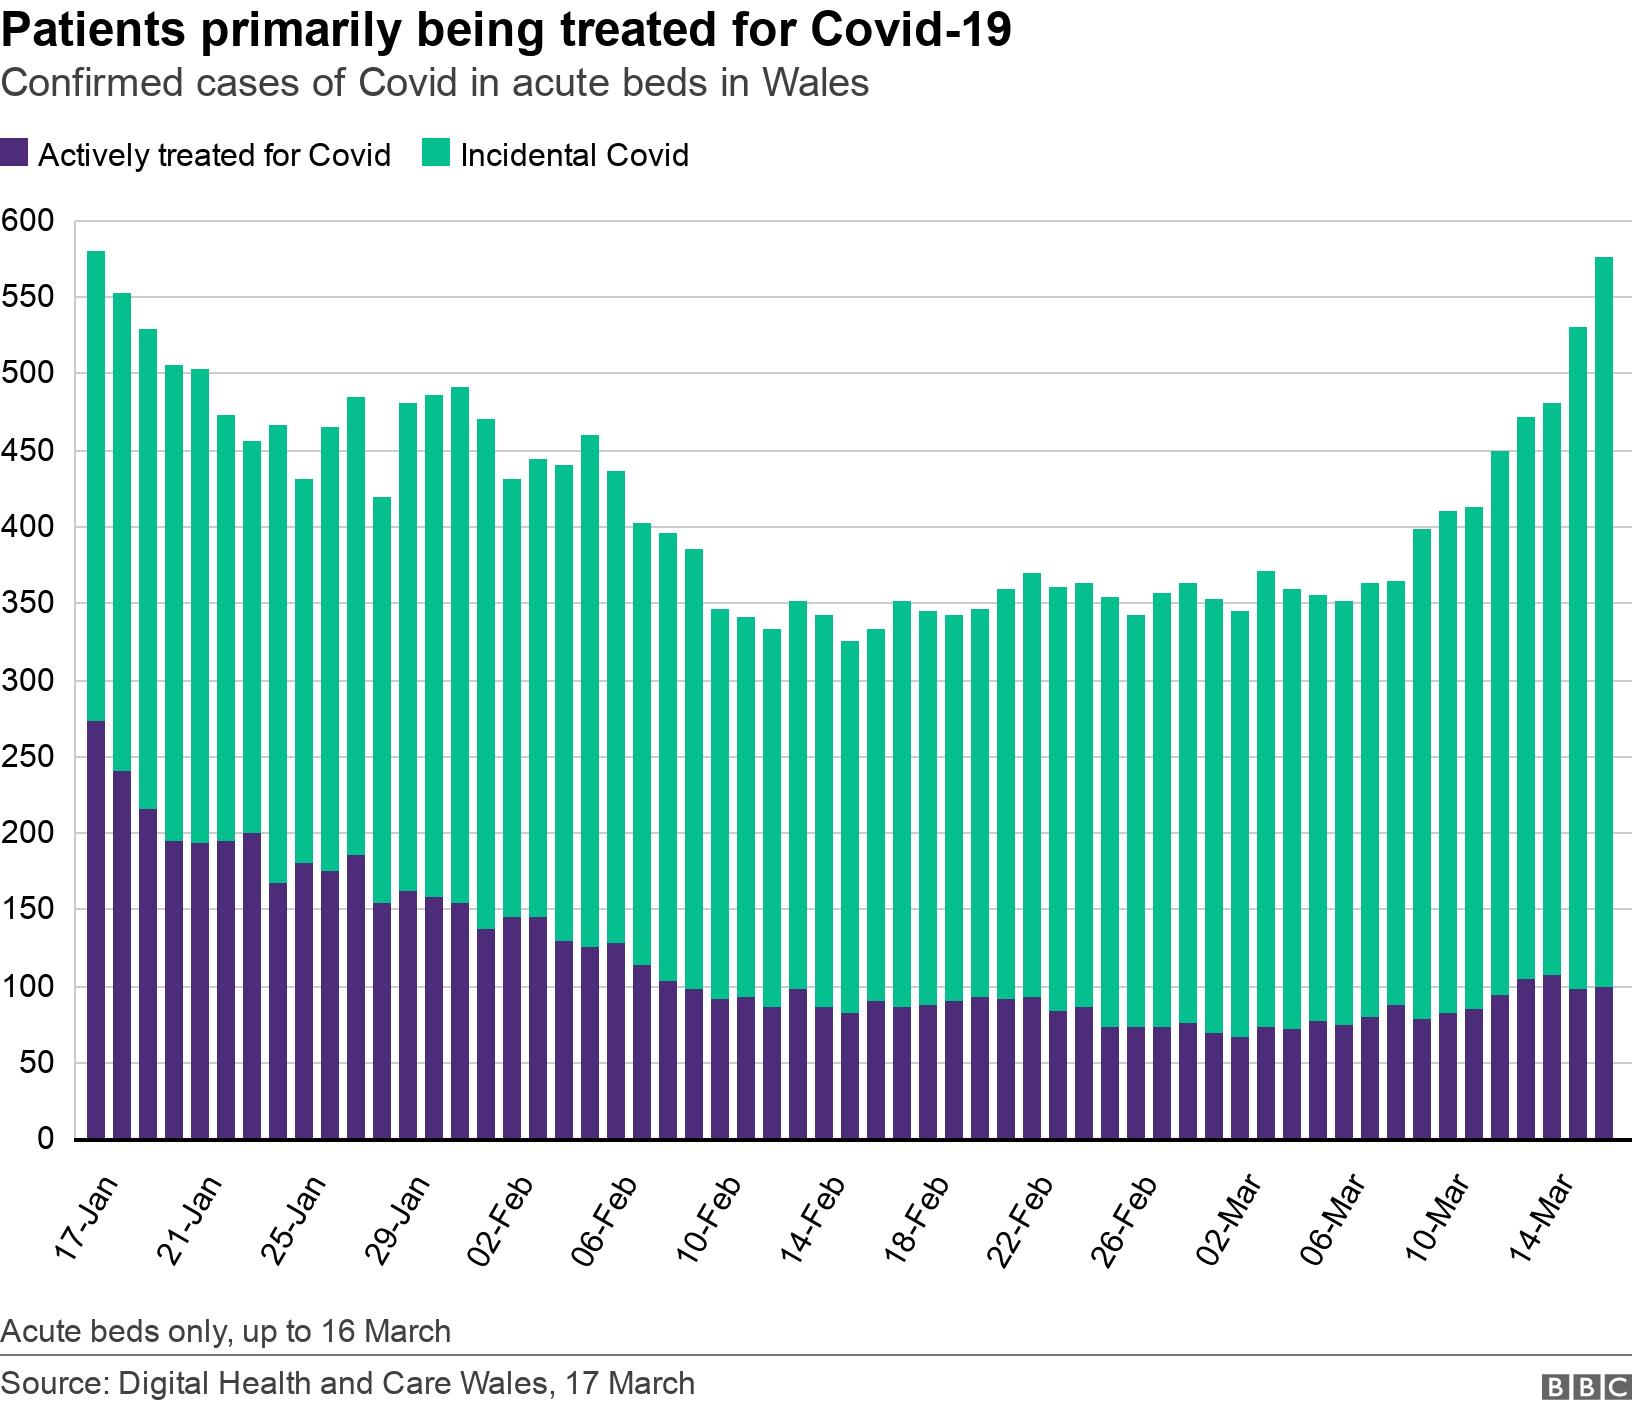 Patients primarily being treated for Covid-19. Confirmed cases of Covid in acute beds in Wales. Acute beds only, up to 16 March.